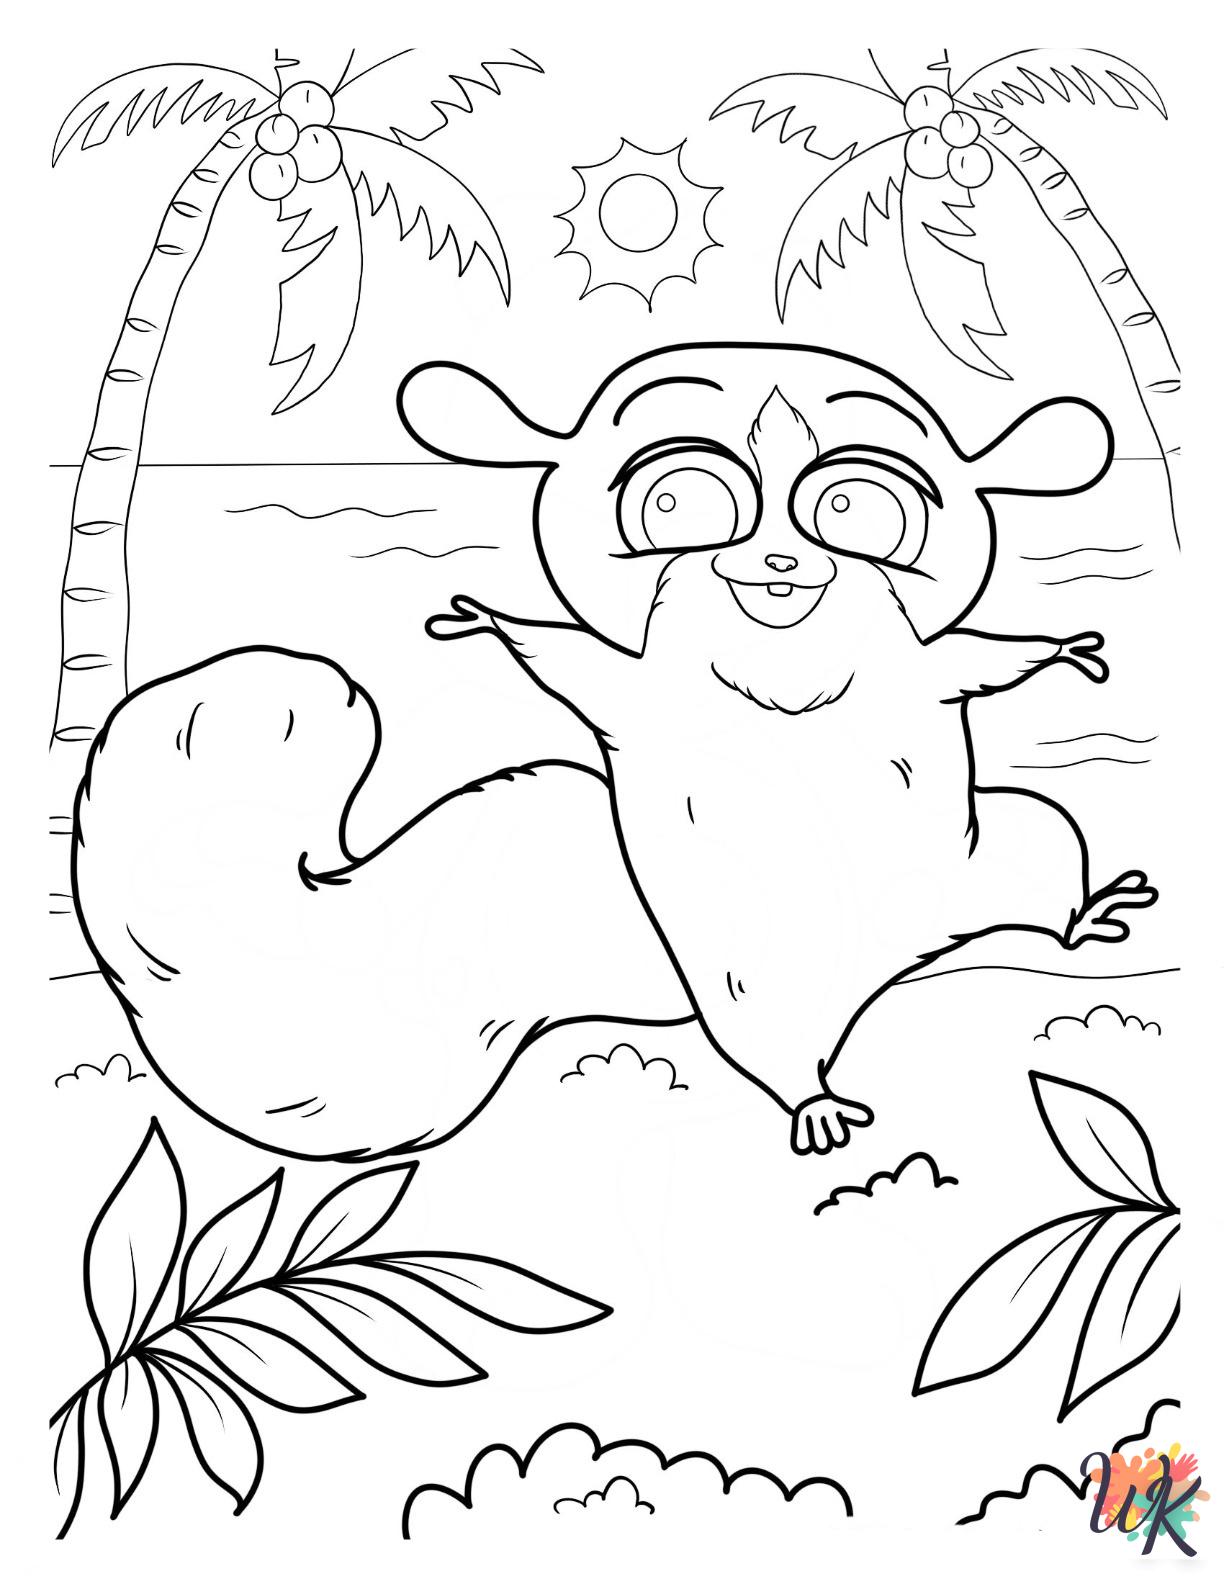 Madagascar themed coloring pages